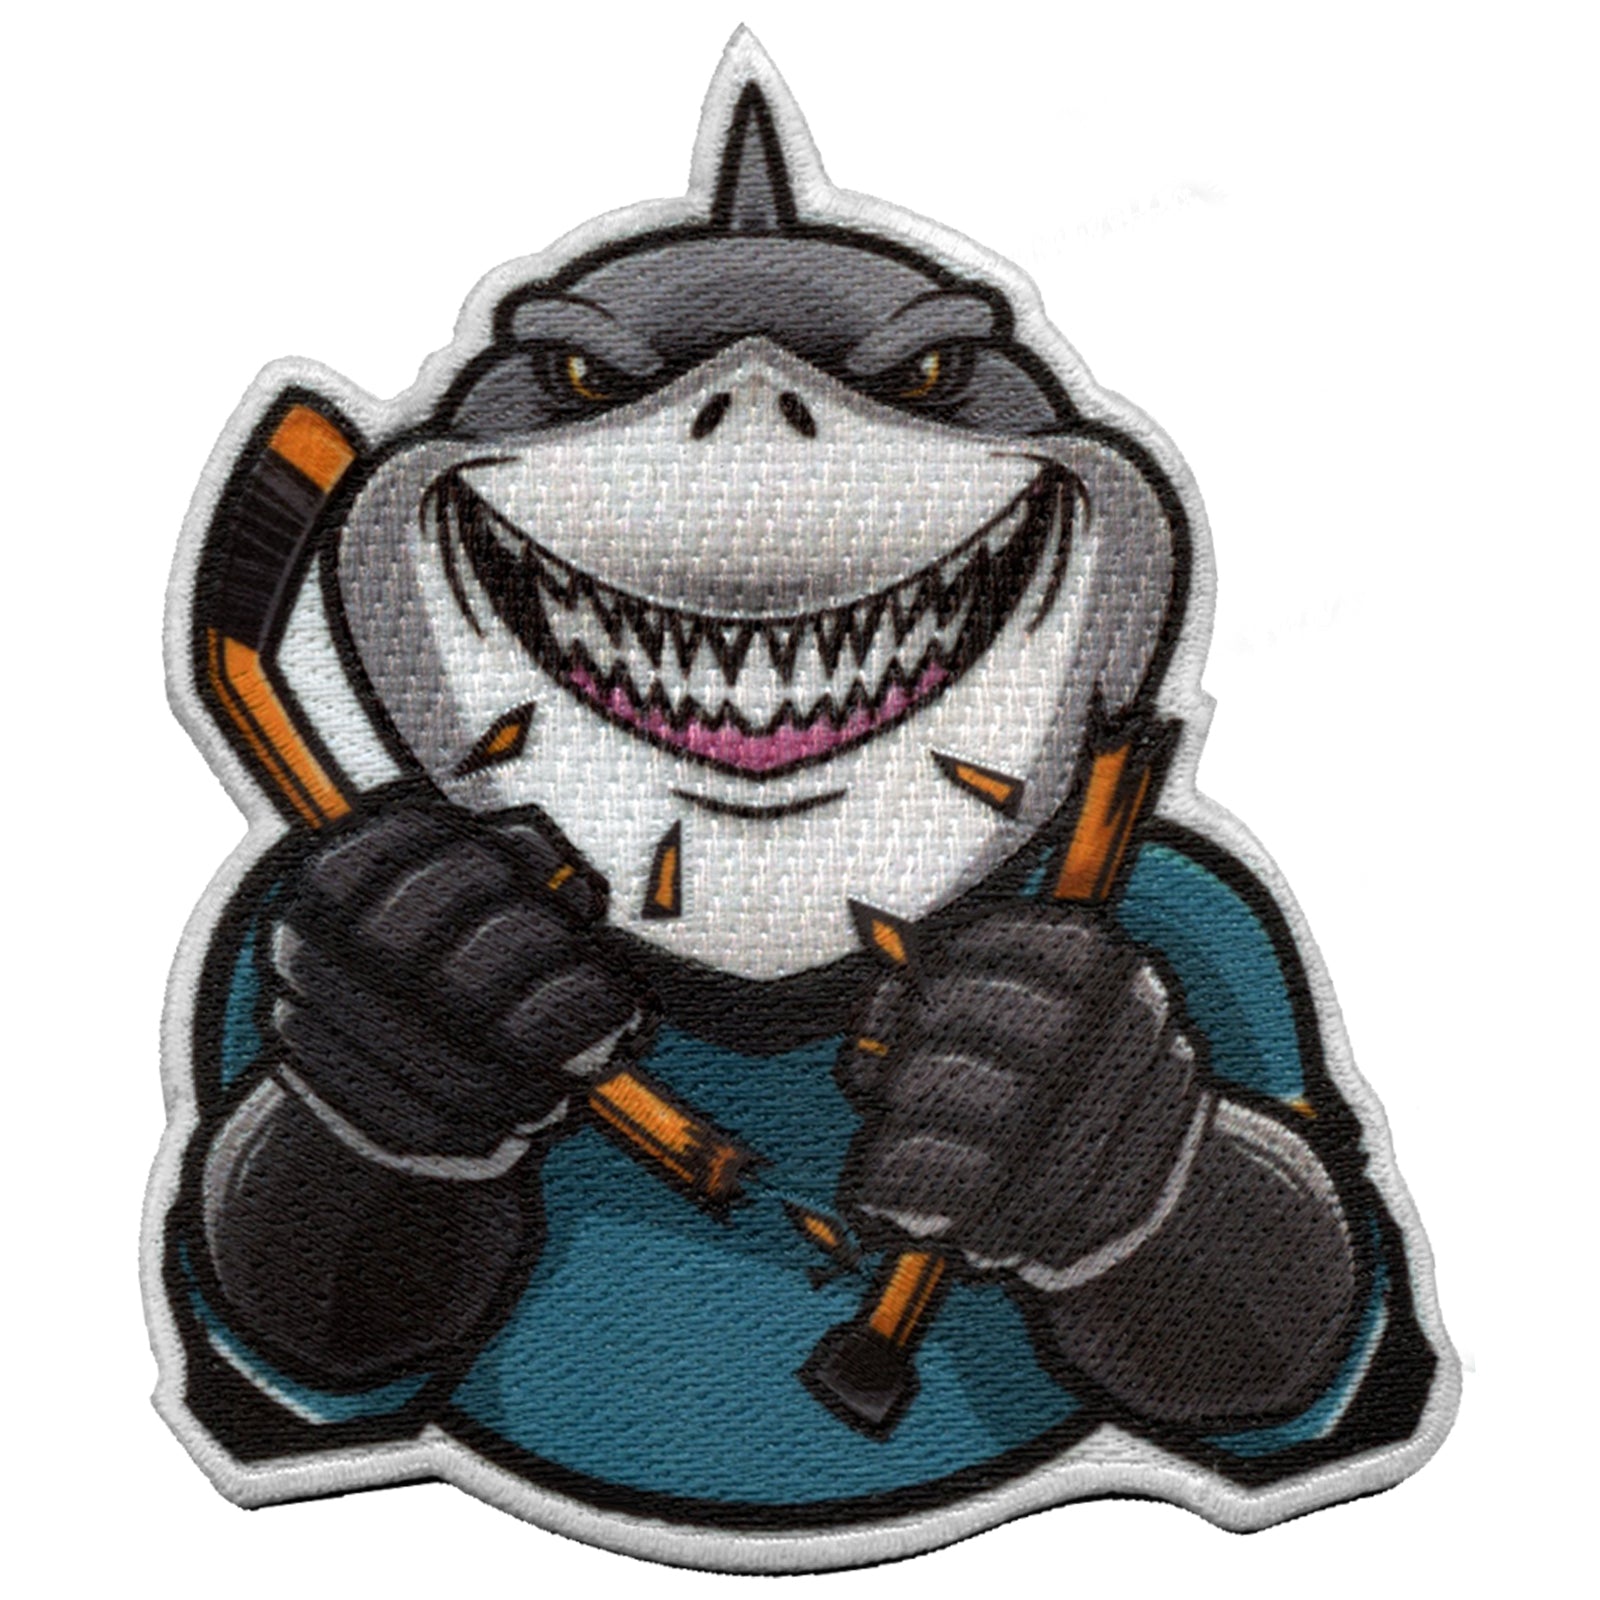 San Jose Sharks - It's a shark wearing a monocle. Need we say more